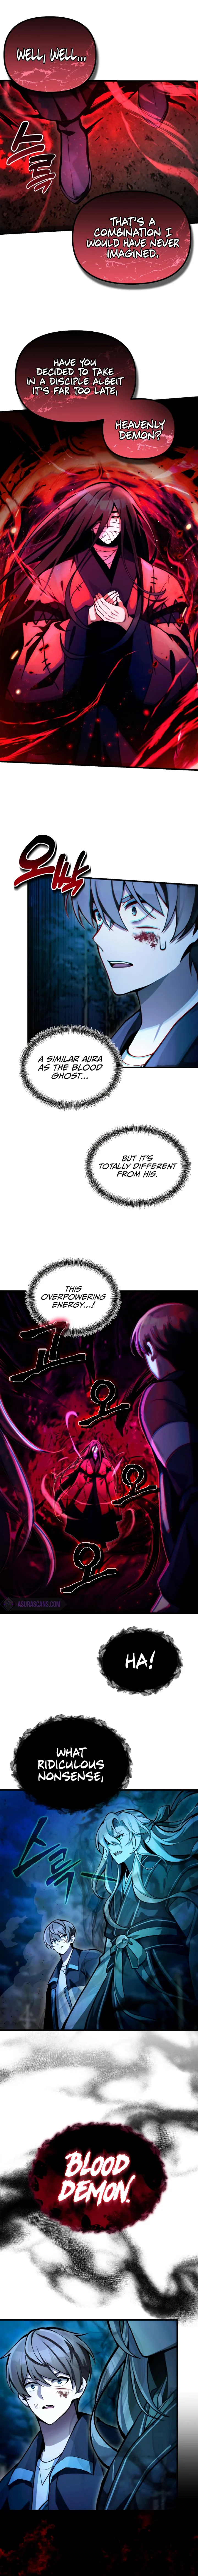 The Heavenly Demon’s Descendant - Chapter 7 Page 9